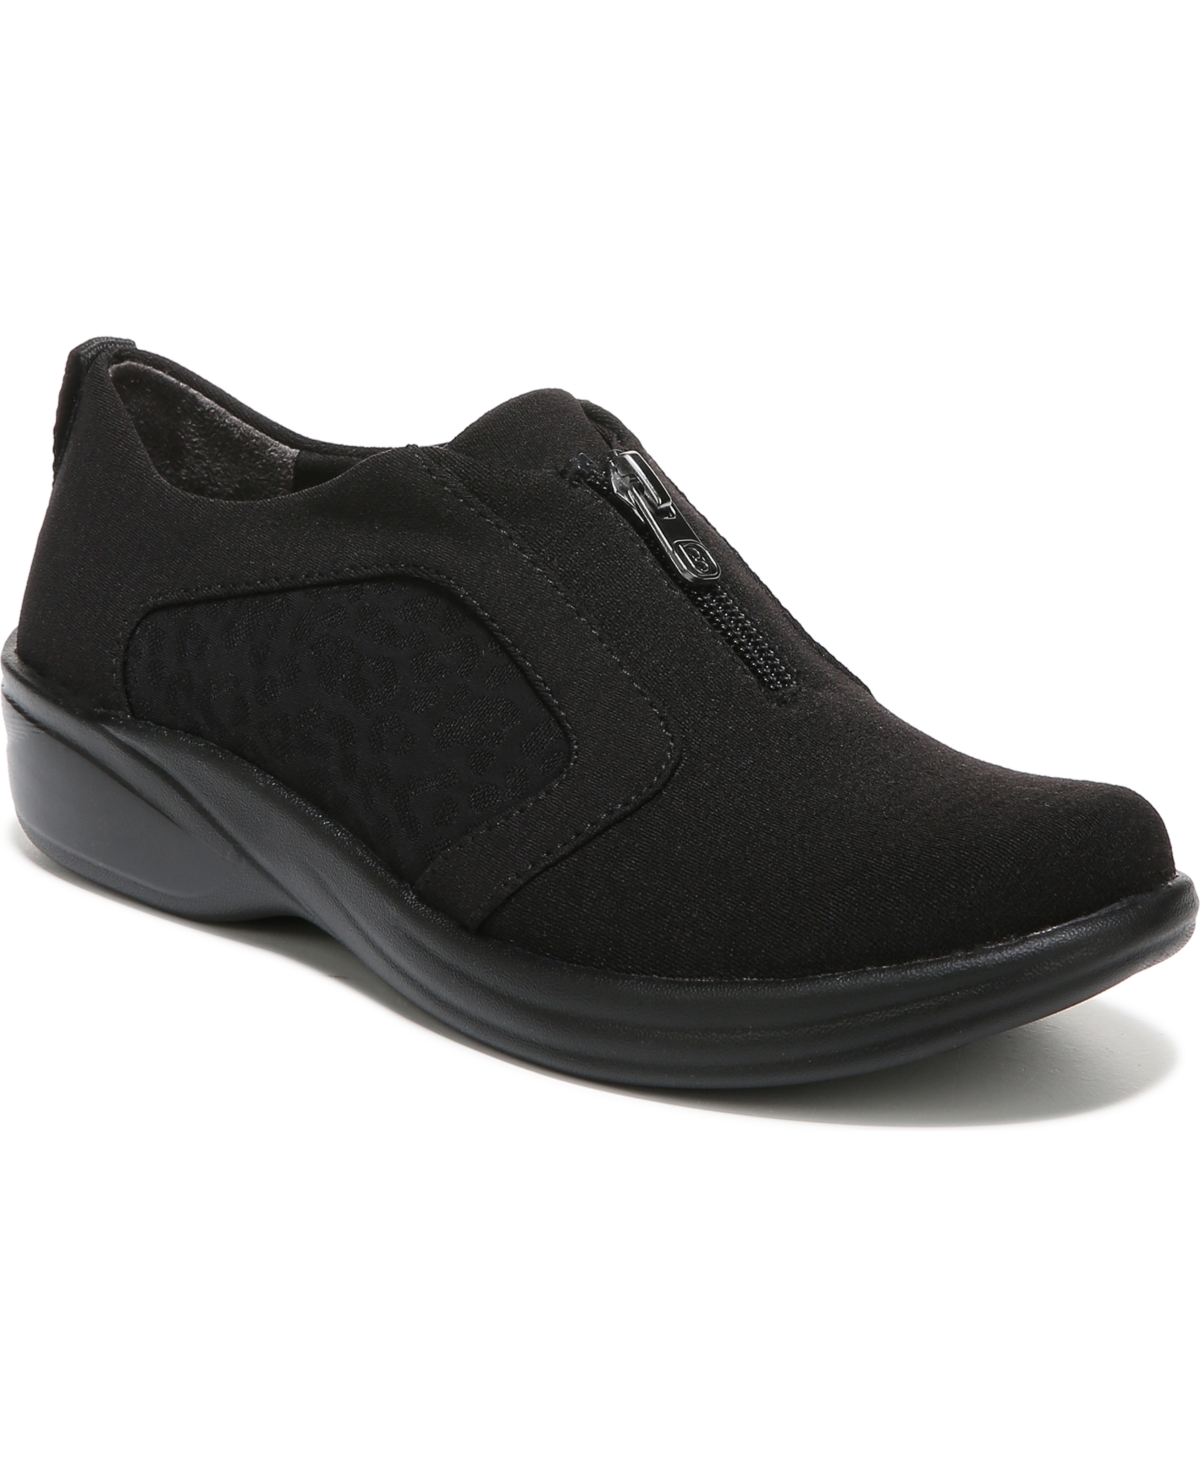 Bzees Poetic Washable Sneakers Women's Shoes In Black Fabric